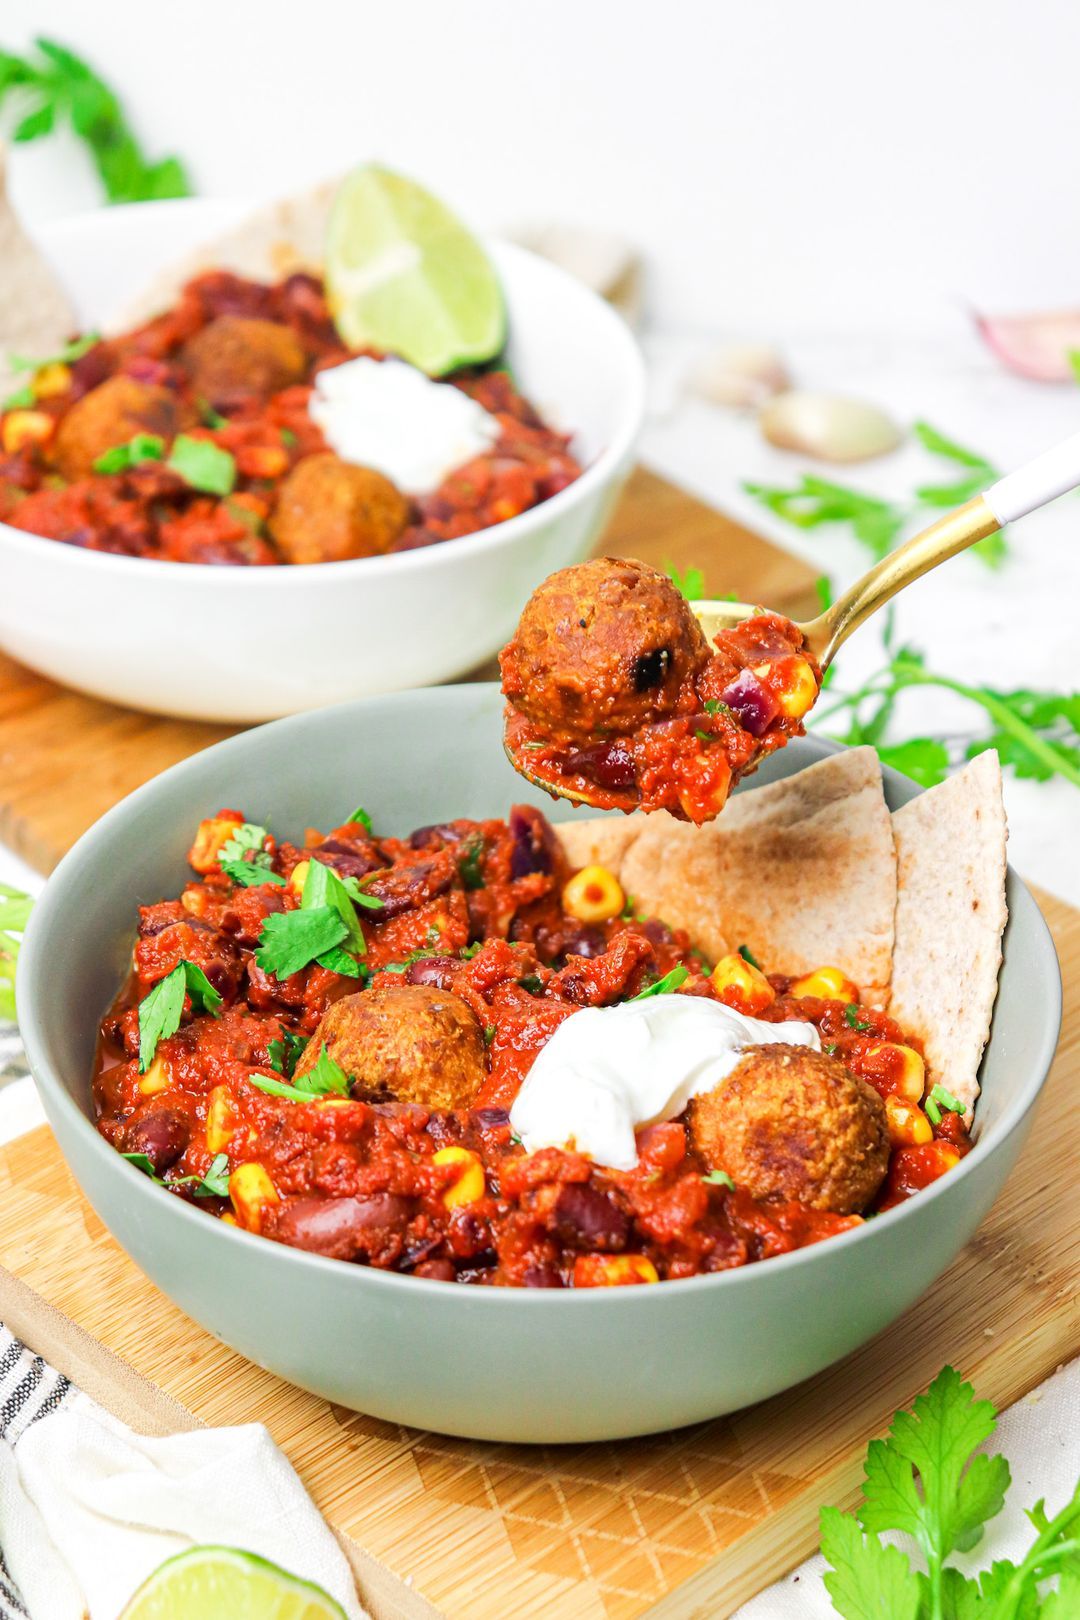 Chili sin carne with vegetable balls